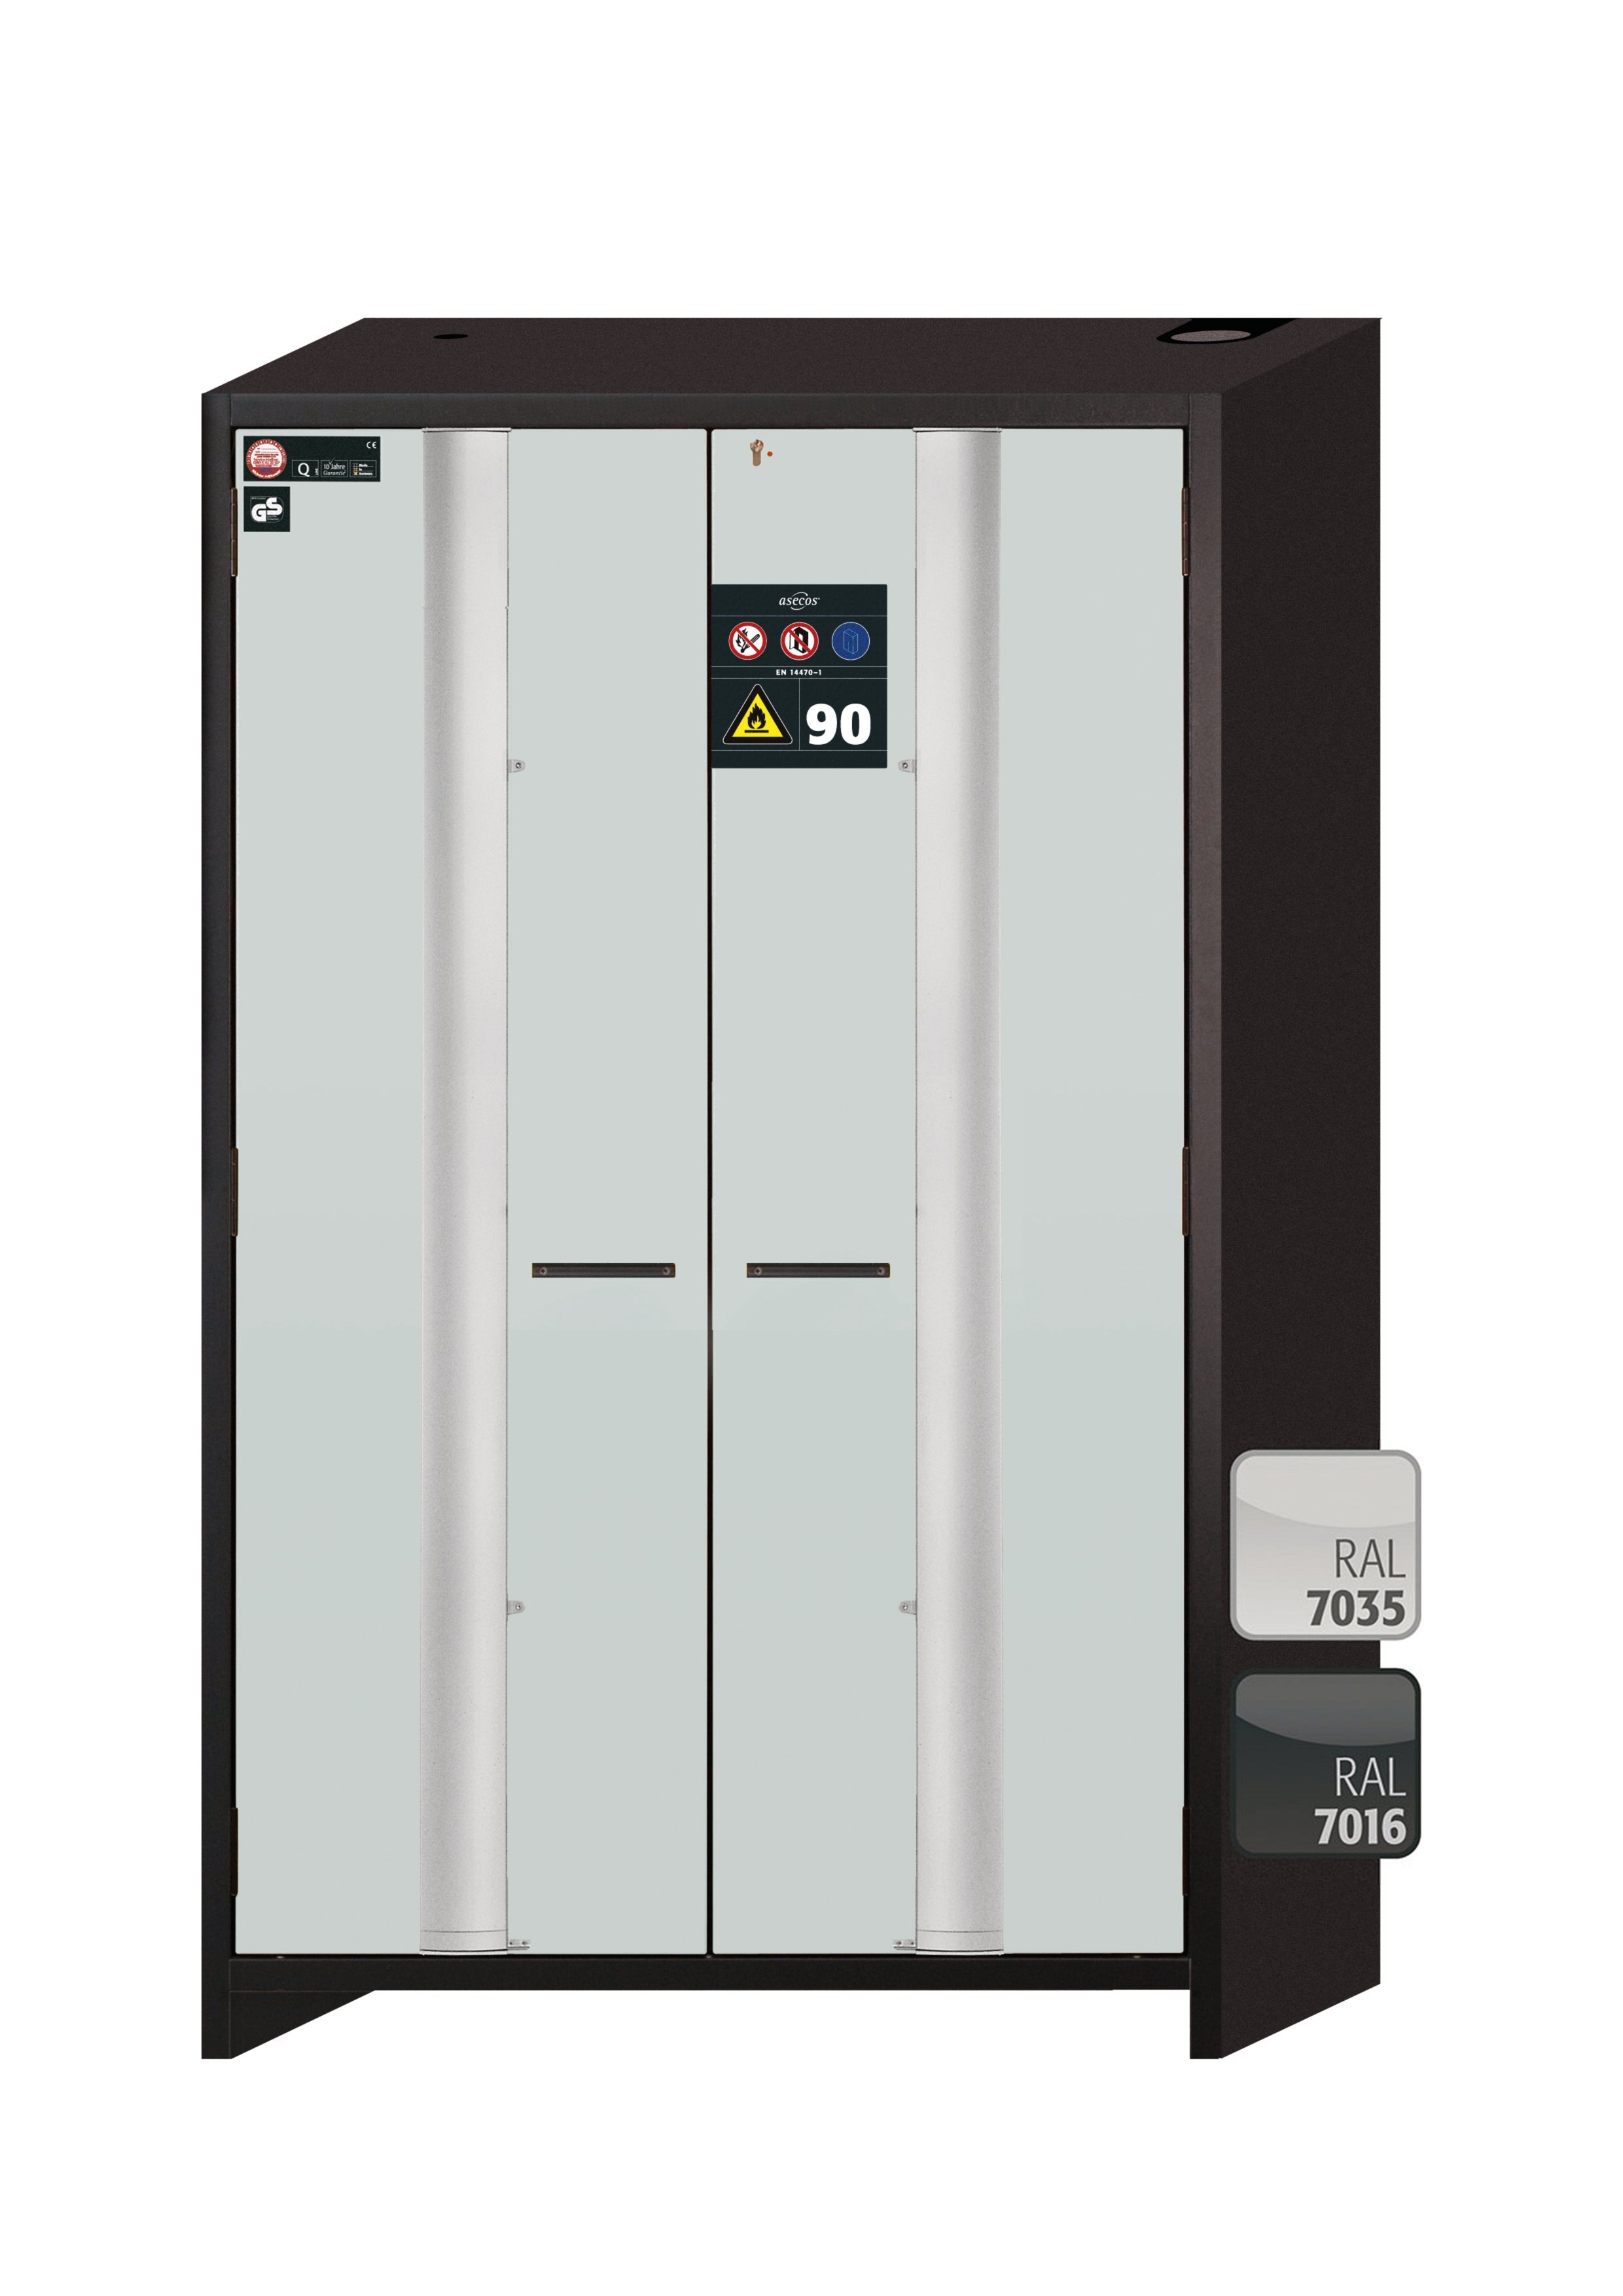 Type 90 safety cabinet Q-PHOENIX-90 model Q90.195.120.FD in light gray RAL 7035 with 5x standard pull-out tray (stainless steel 1.4301)